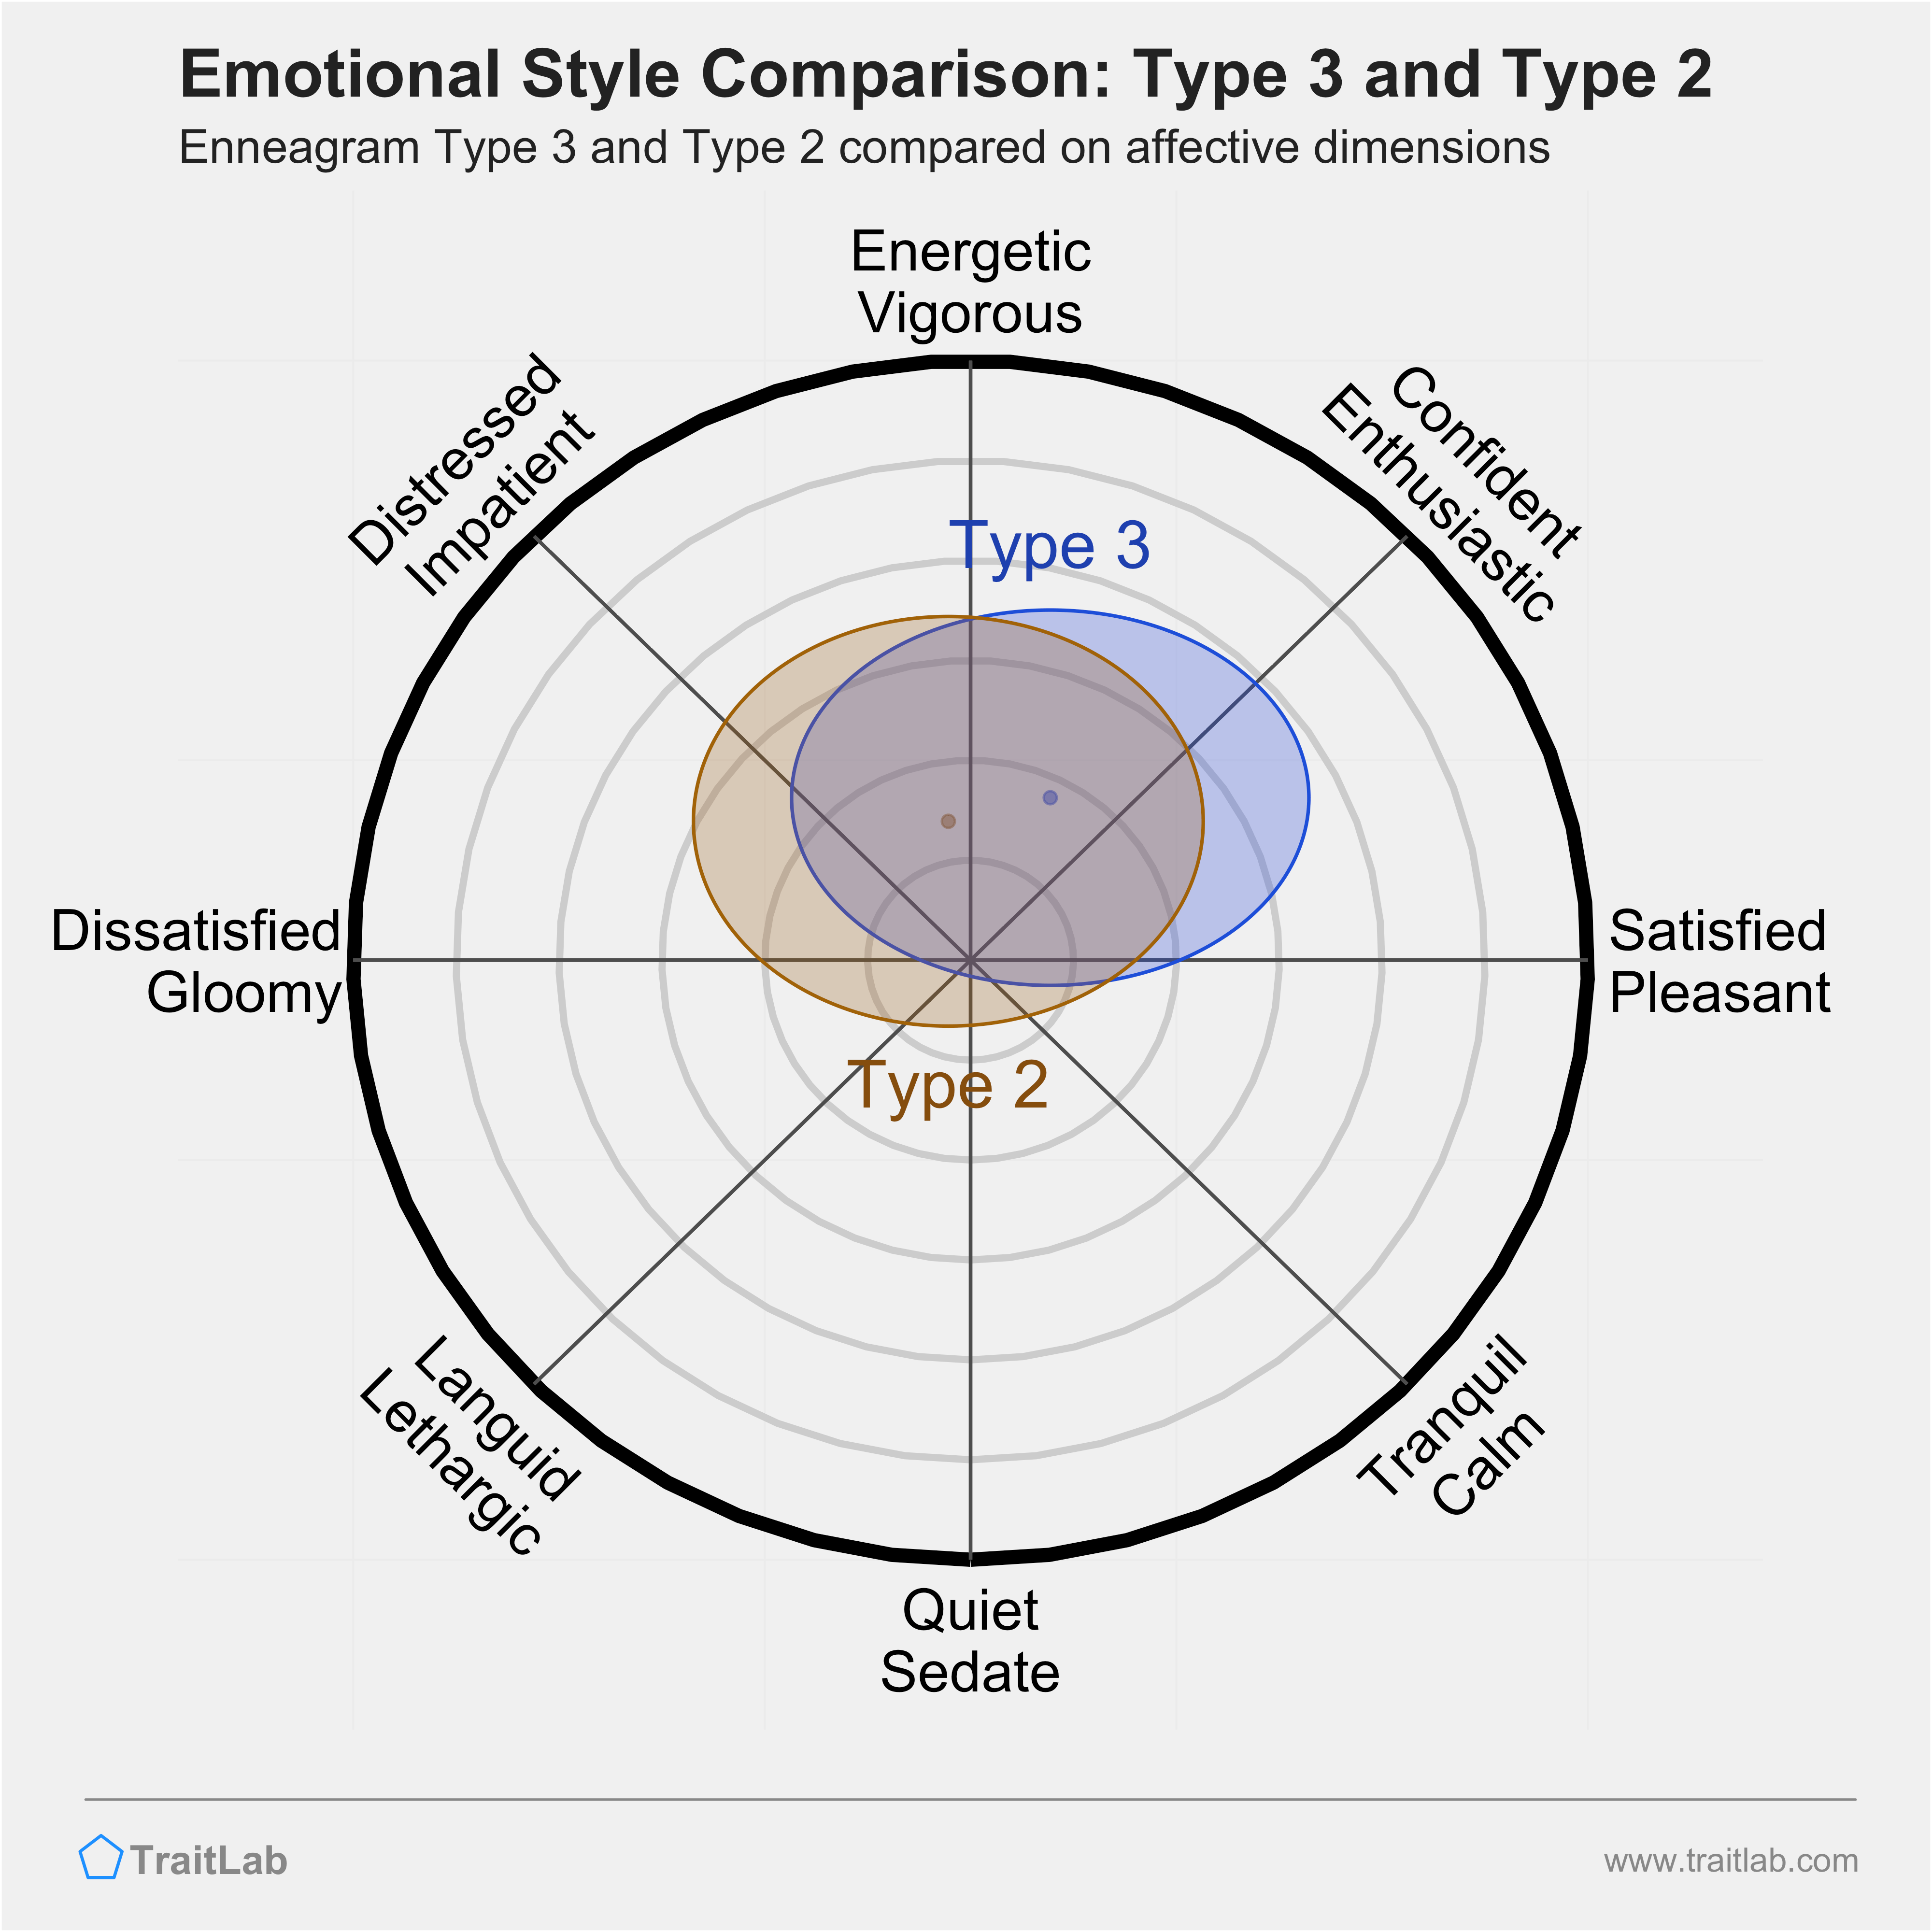 Type 3 and Type 2 comparison across emotional (affective) dimensions